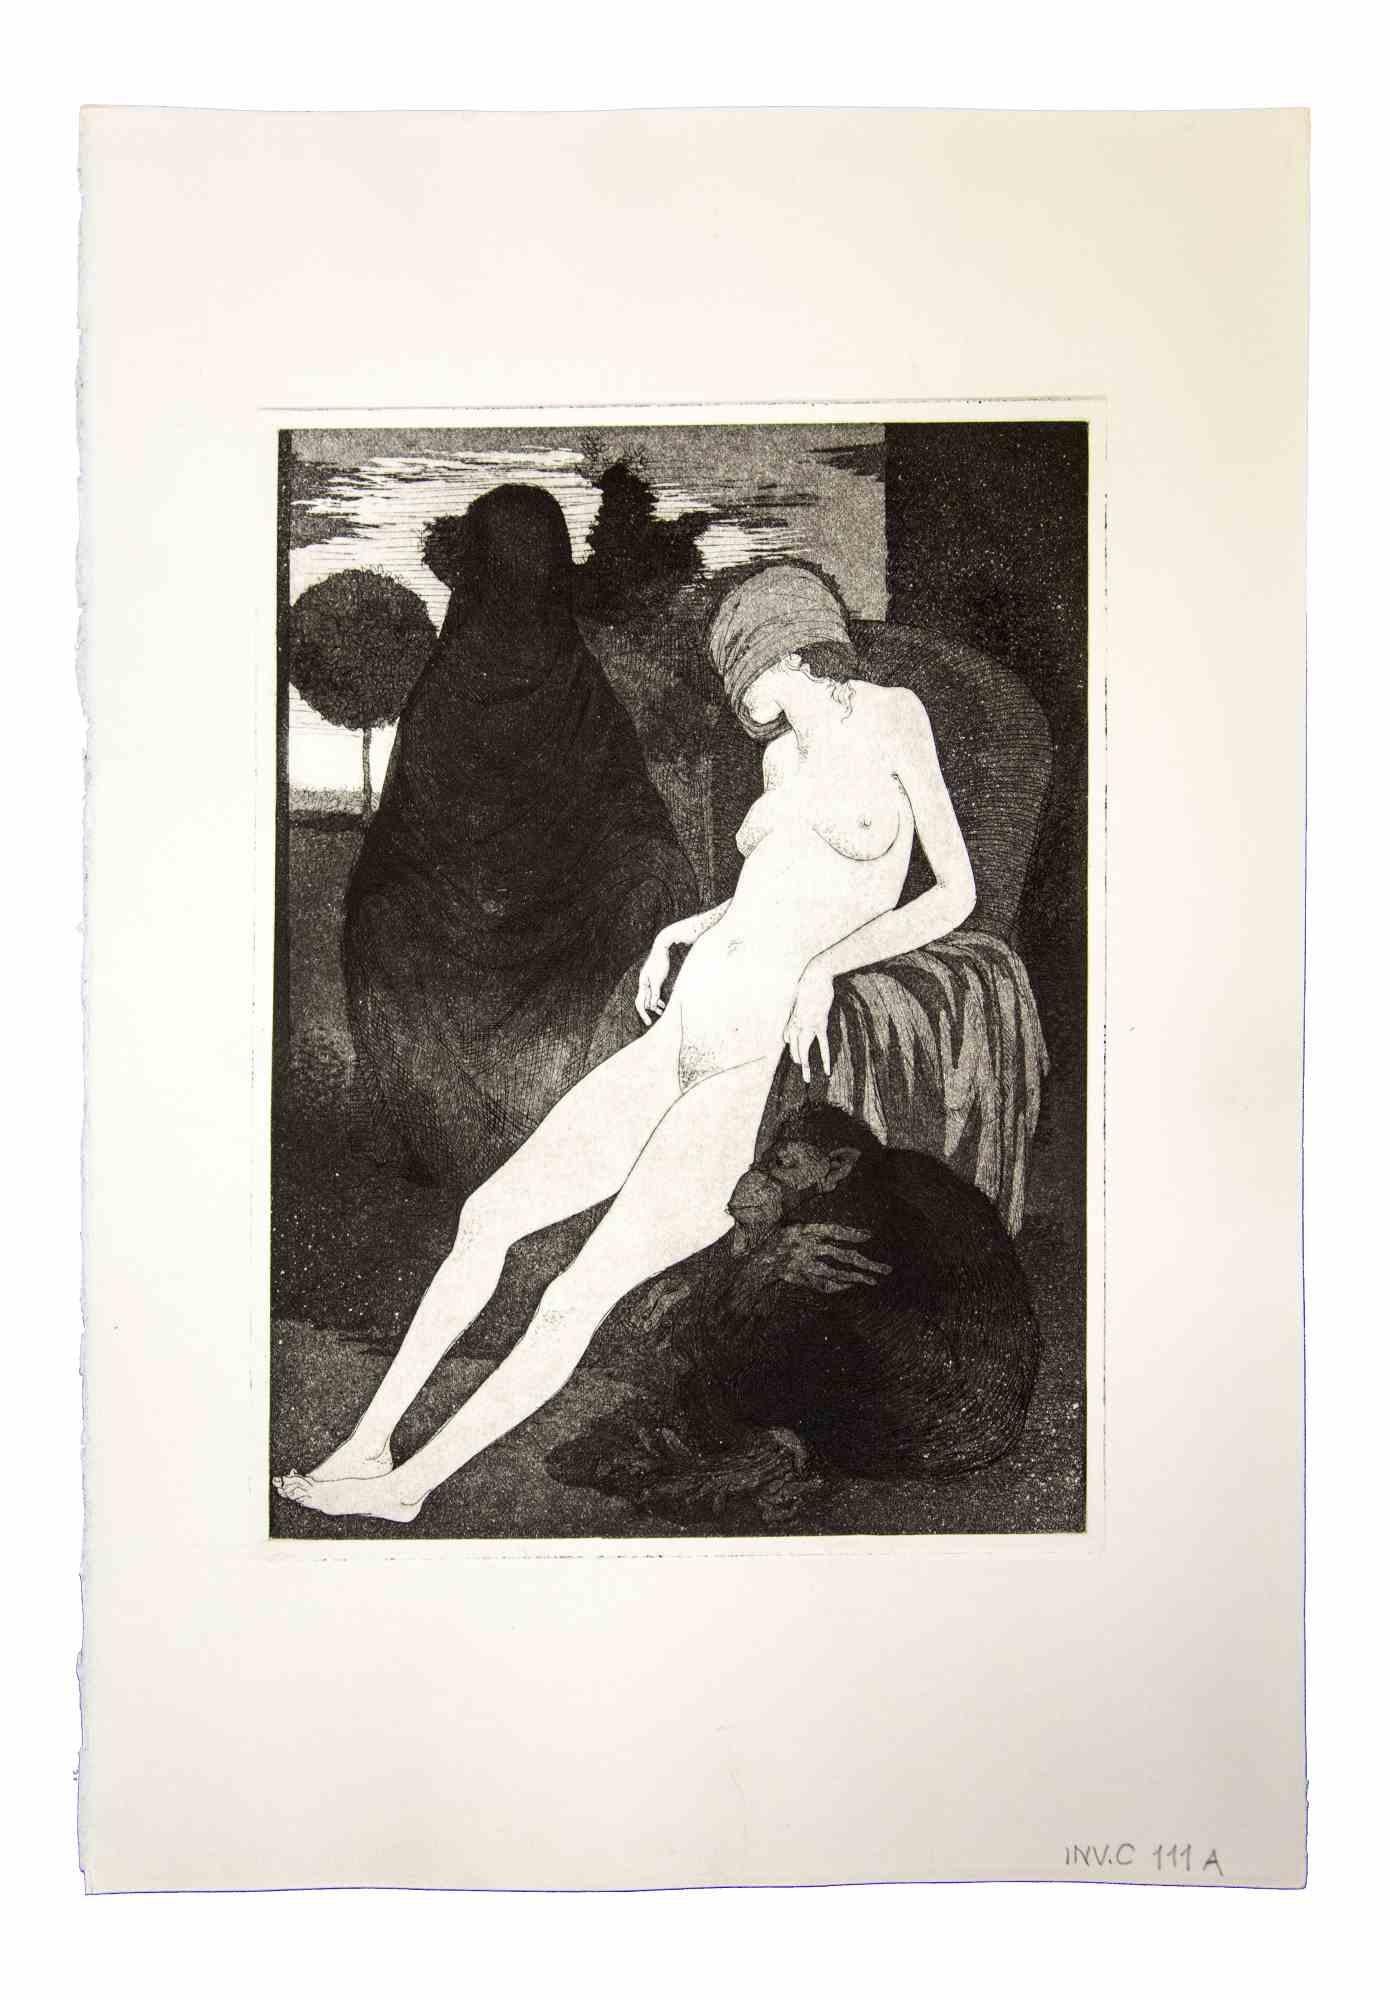 Blindfold Sibyl is an original etching and aquatint realized by Leo Guida in 1970S.

Good condition.

Mounted on a white cardboard passpartout (50x34).

Artist proof.

Leo Guida  (1992 - 2017). Sensitive to current issues, artistic movements and